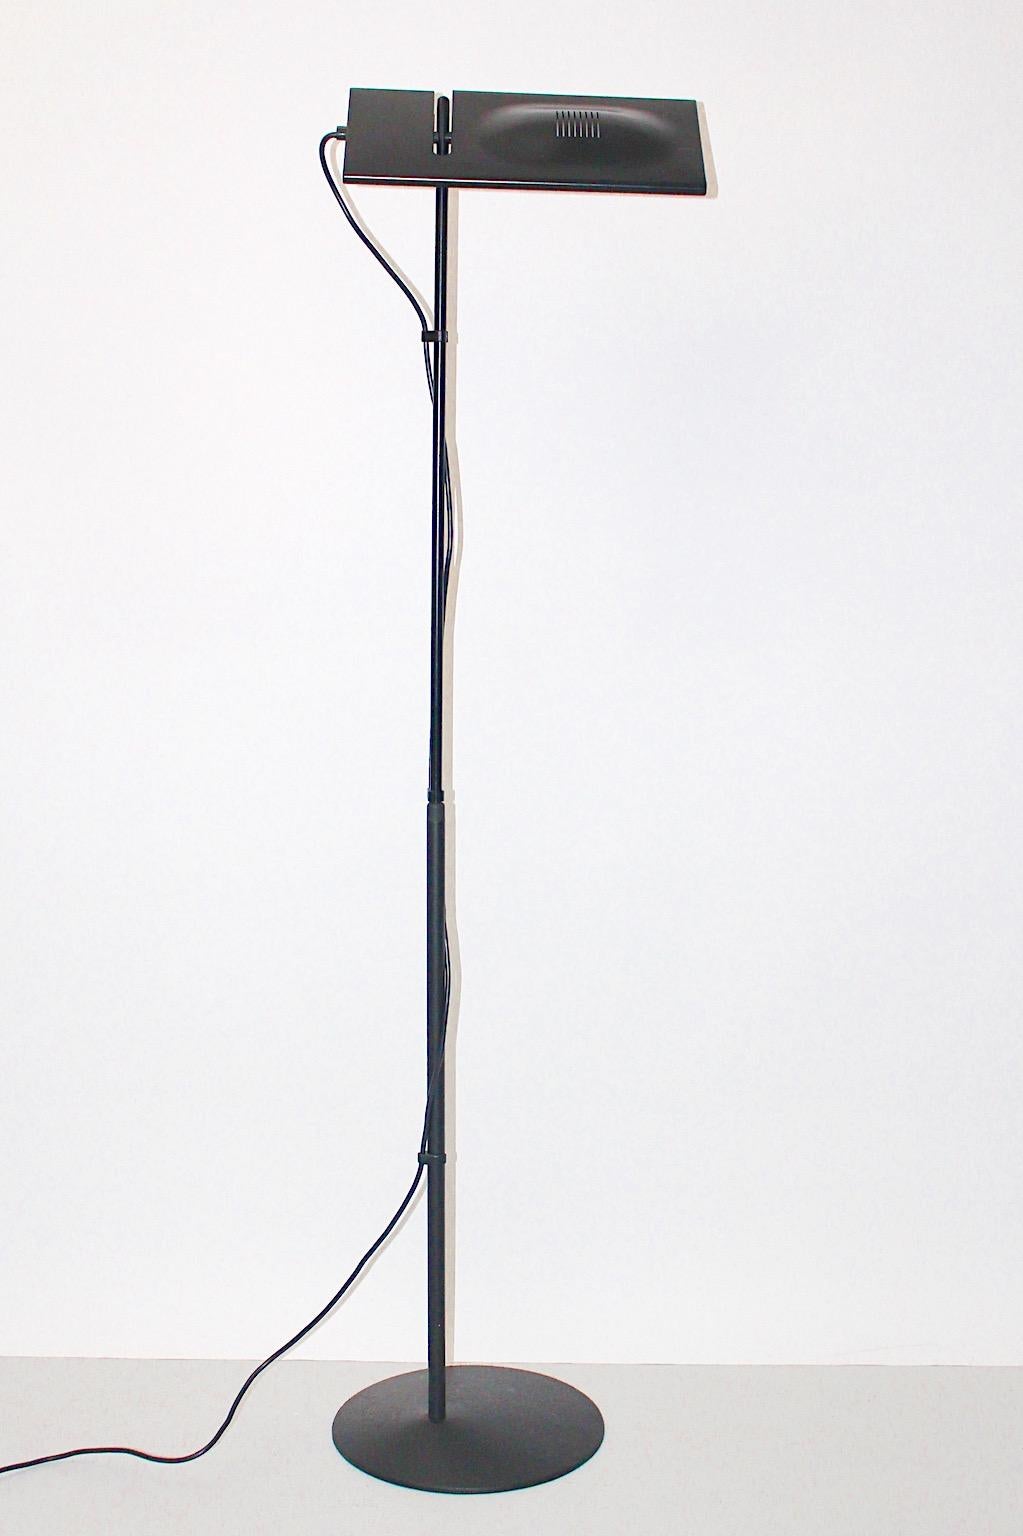 Black modern vintage floor lamp model Luna, which was designed by Marco Colombo & Mario Baraglia for PAF Studio Milano, circa 1980.
The floor lamp shows black lacquered adjustable metal stem and adjustable lamp shade.
It lights with a halogen lamp